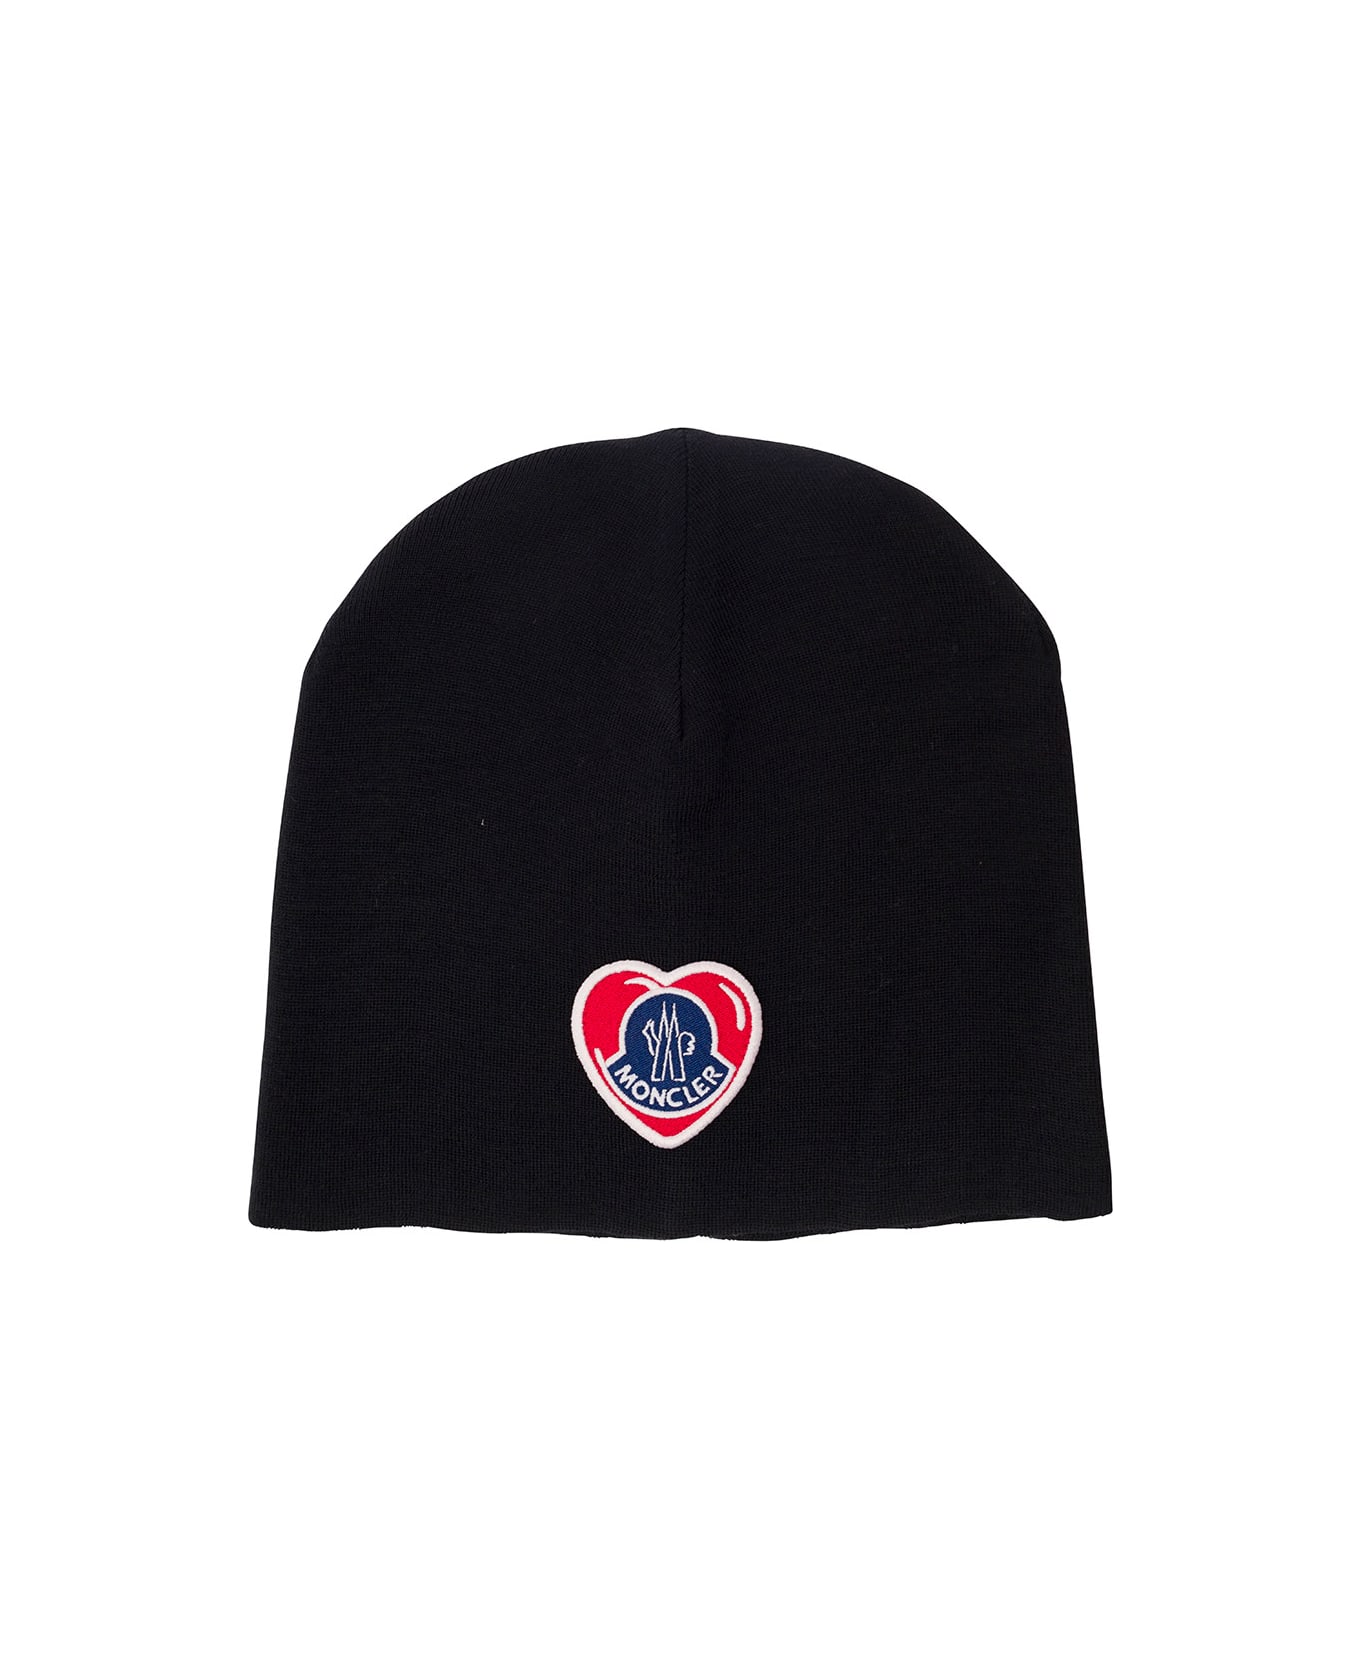 Moncler Black Beanie With Heart-shaped Logo Patch In Wool Blend Man - Black